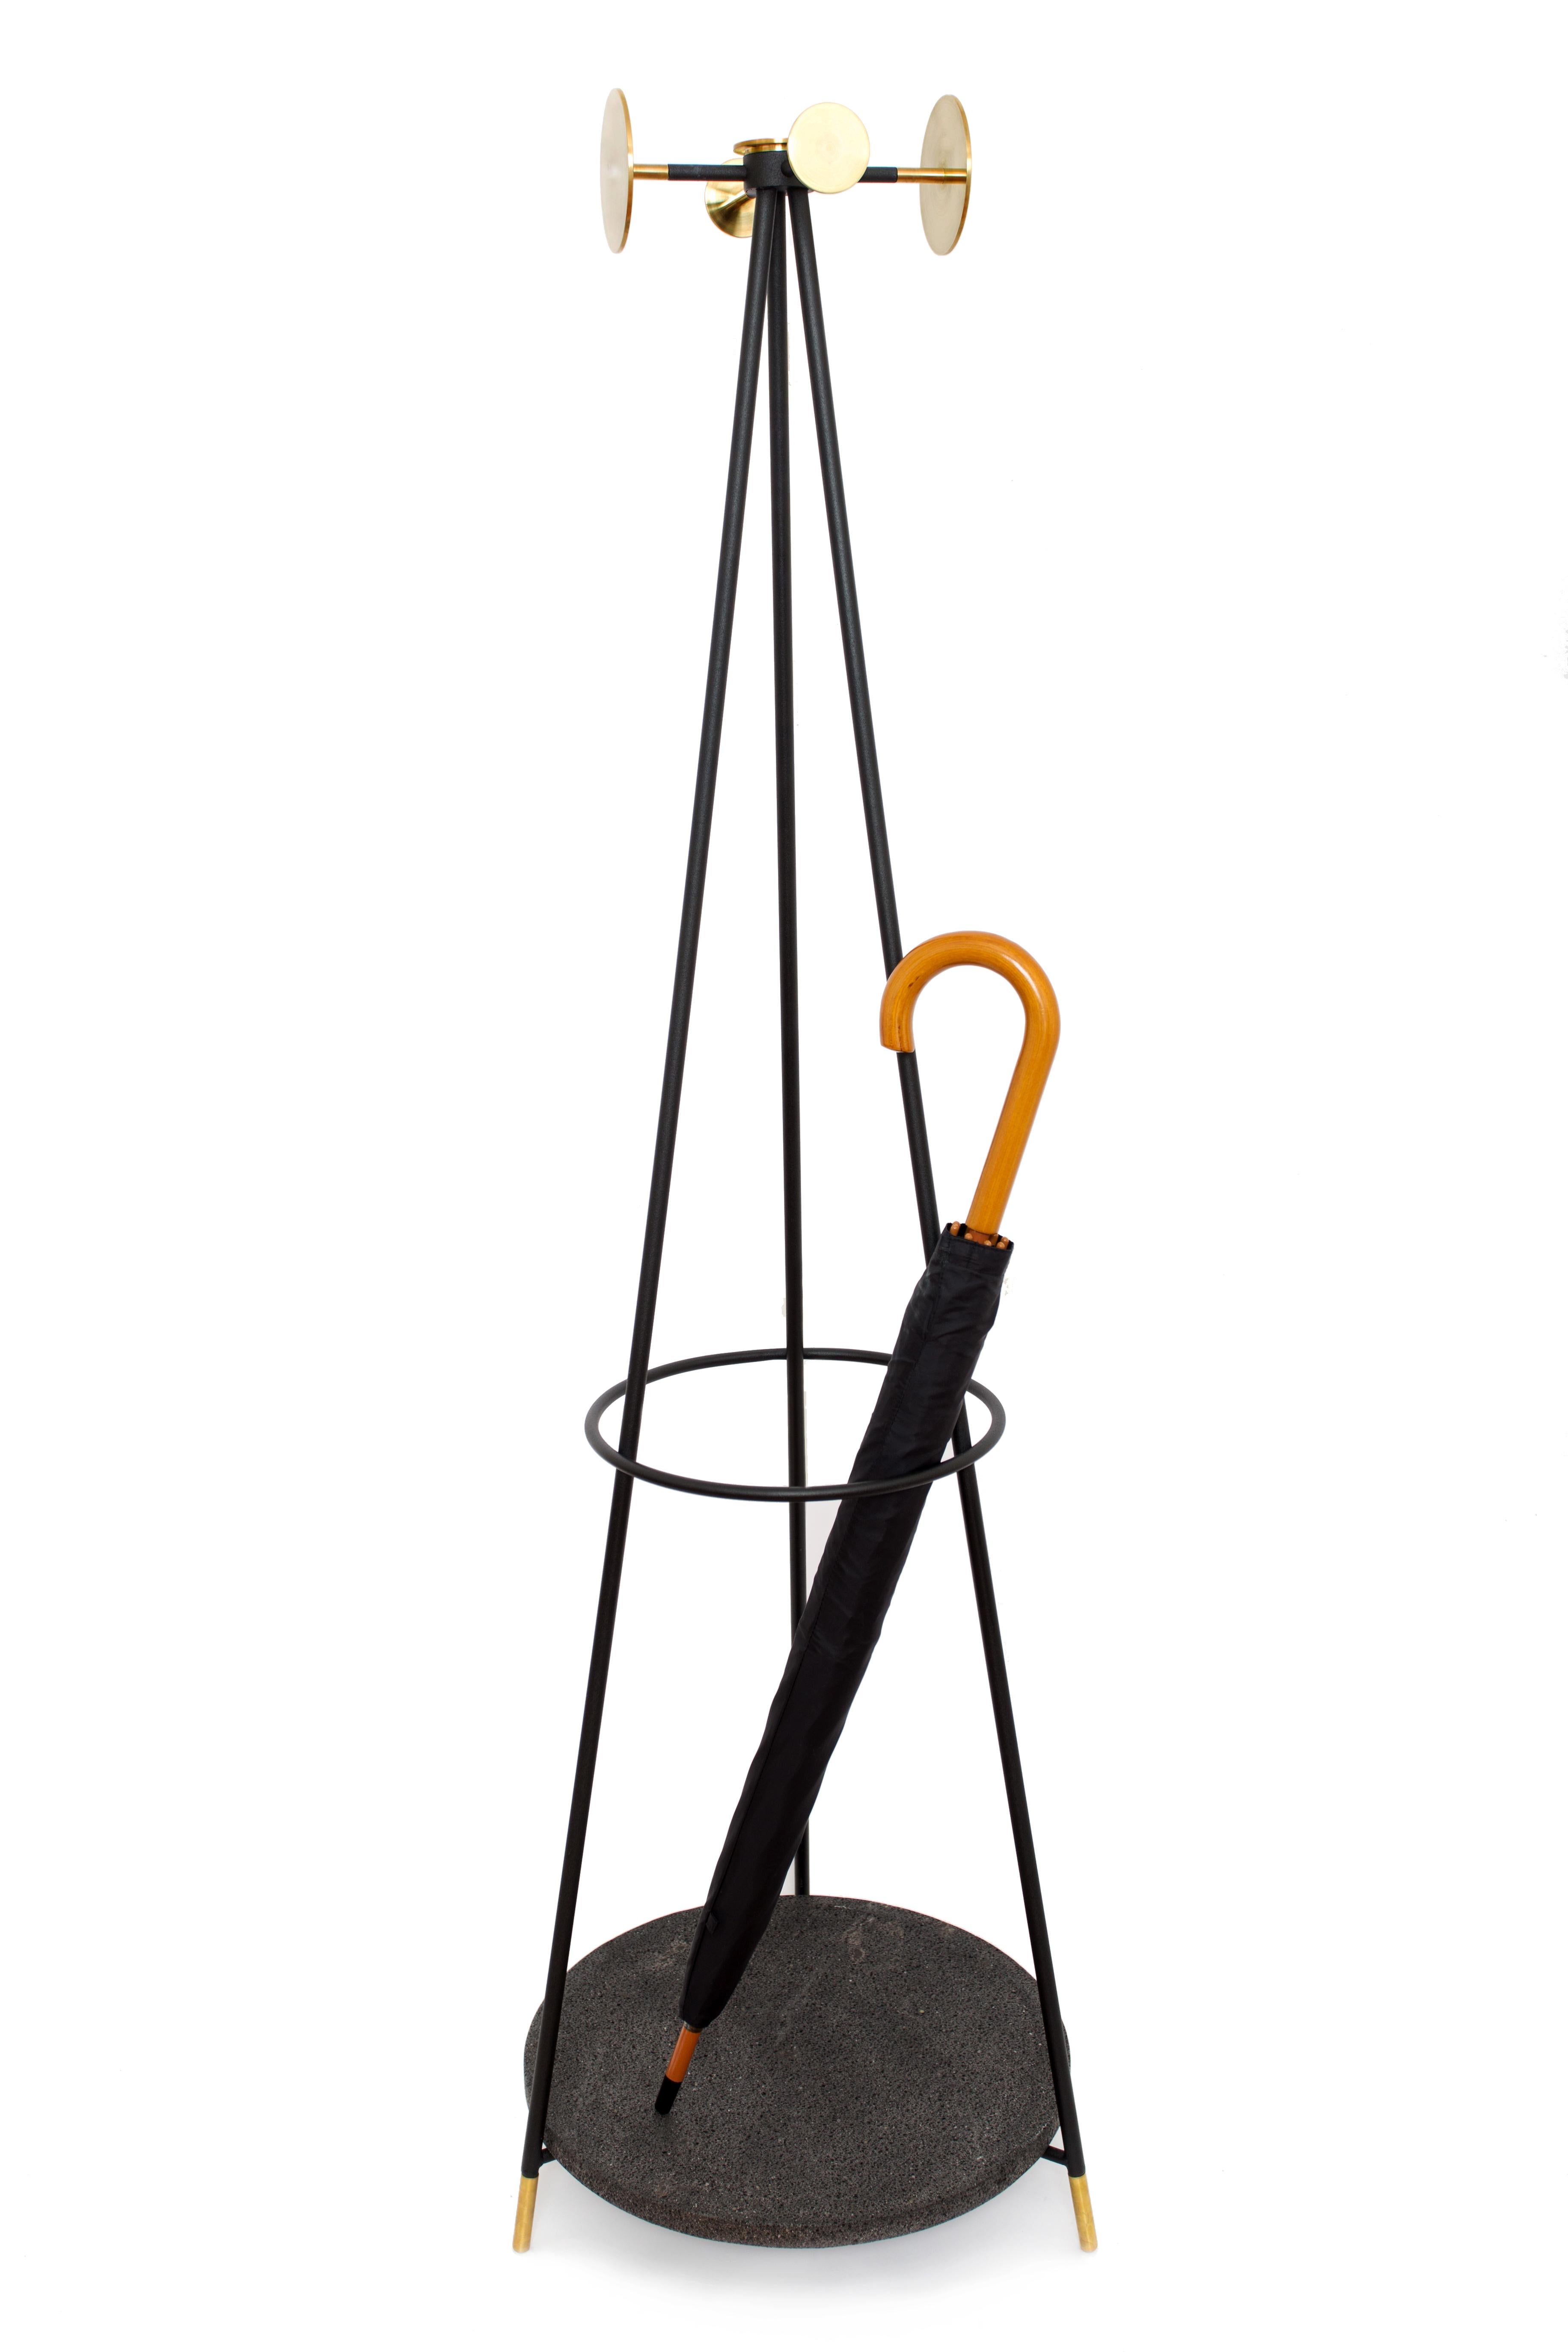 Modern Brass Coat and Umbrella Stand by Comité De Proyectos For Sale